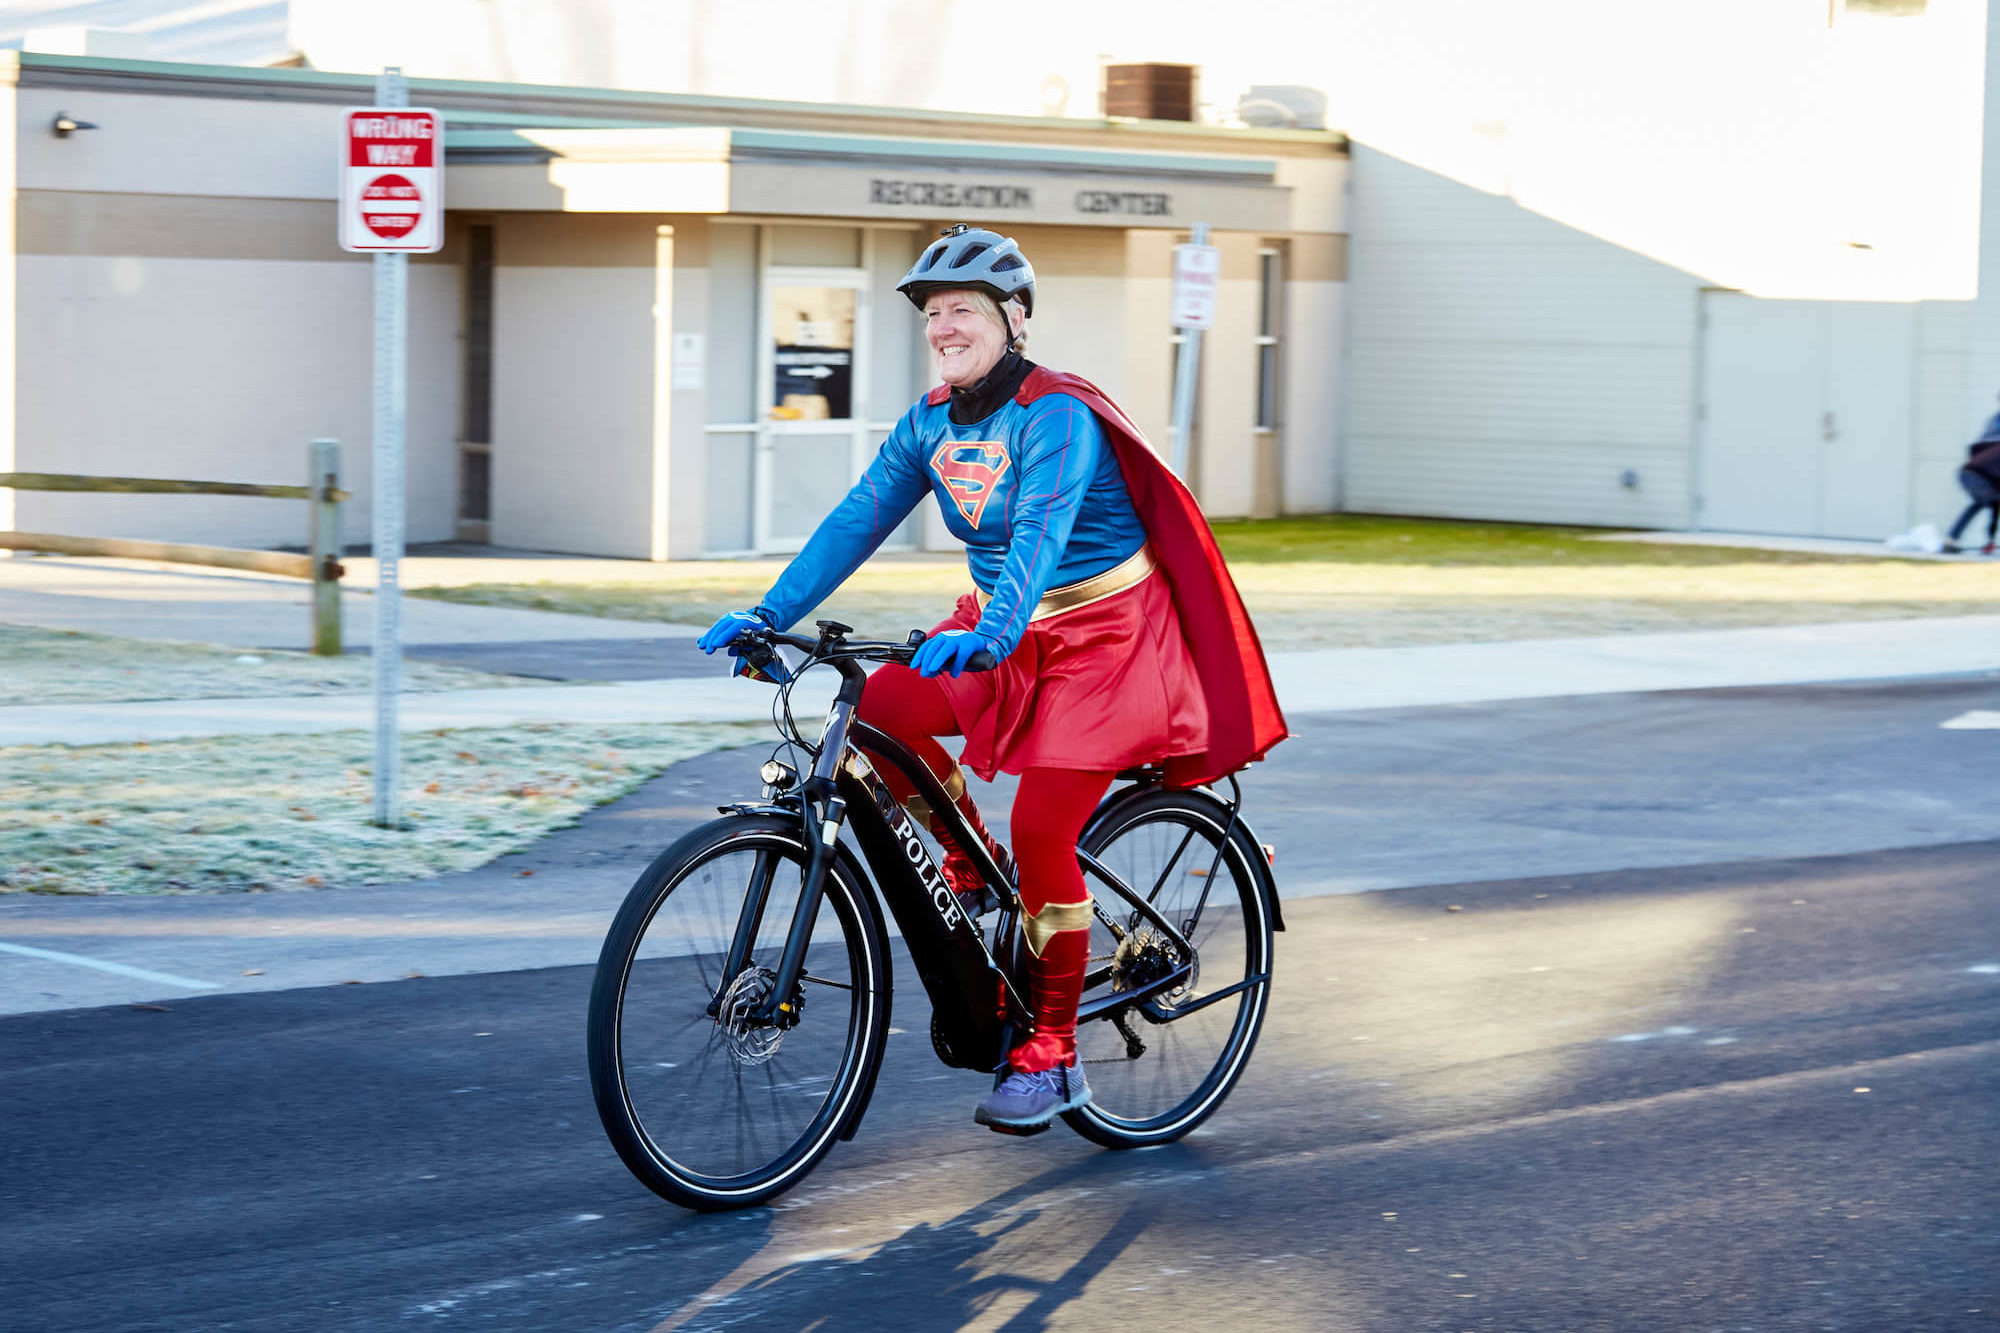 A woman in a superman costume ride an ebike with her cape blowing in the wind.